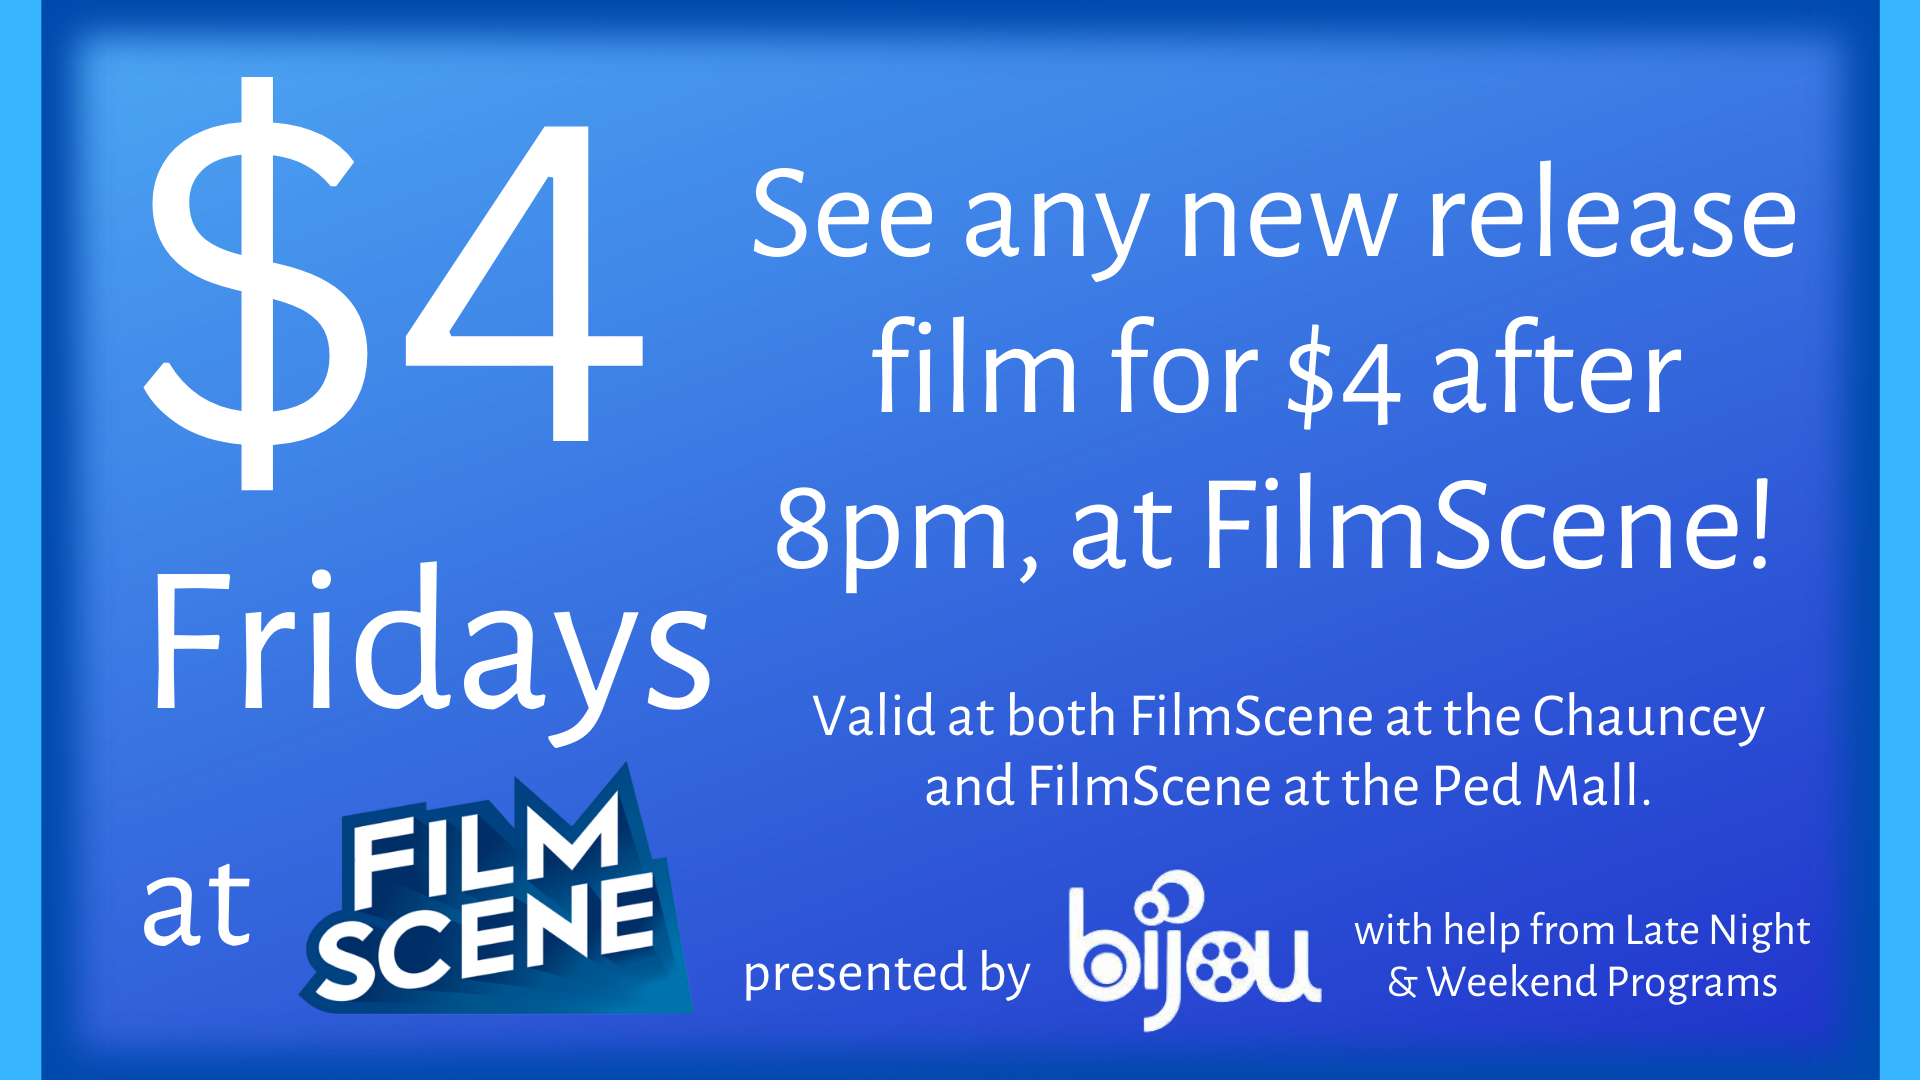 White text against a blue background with a turquoise border, advertising $4 Fridays at FilmScene.